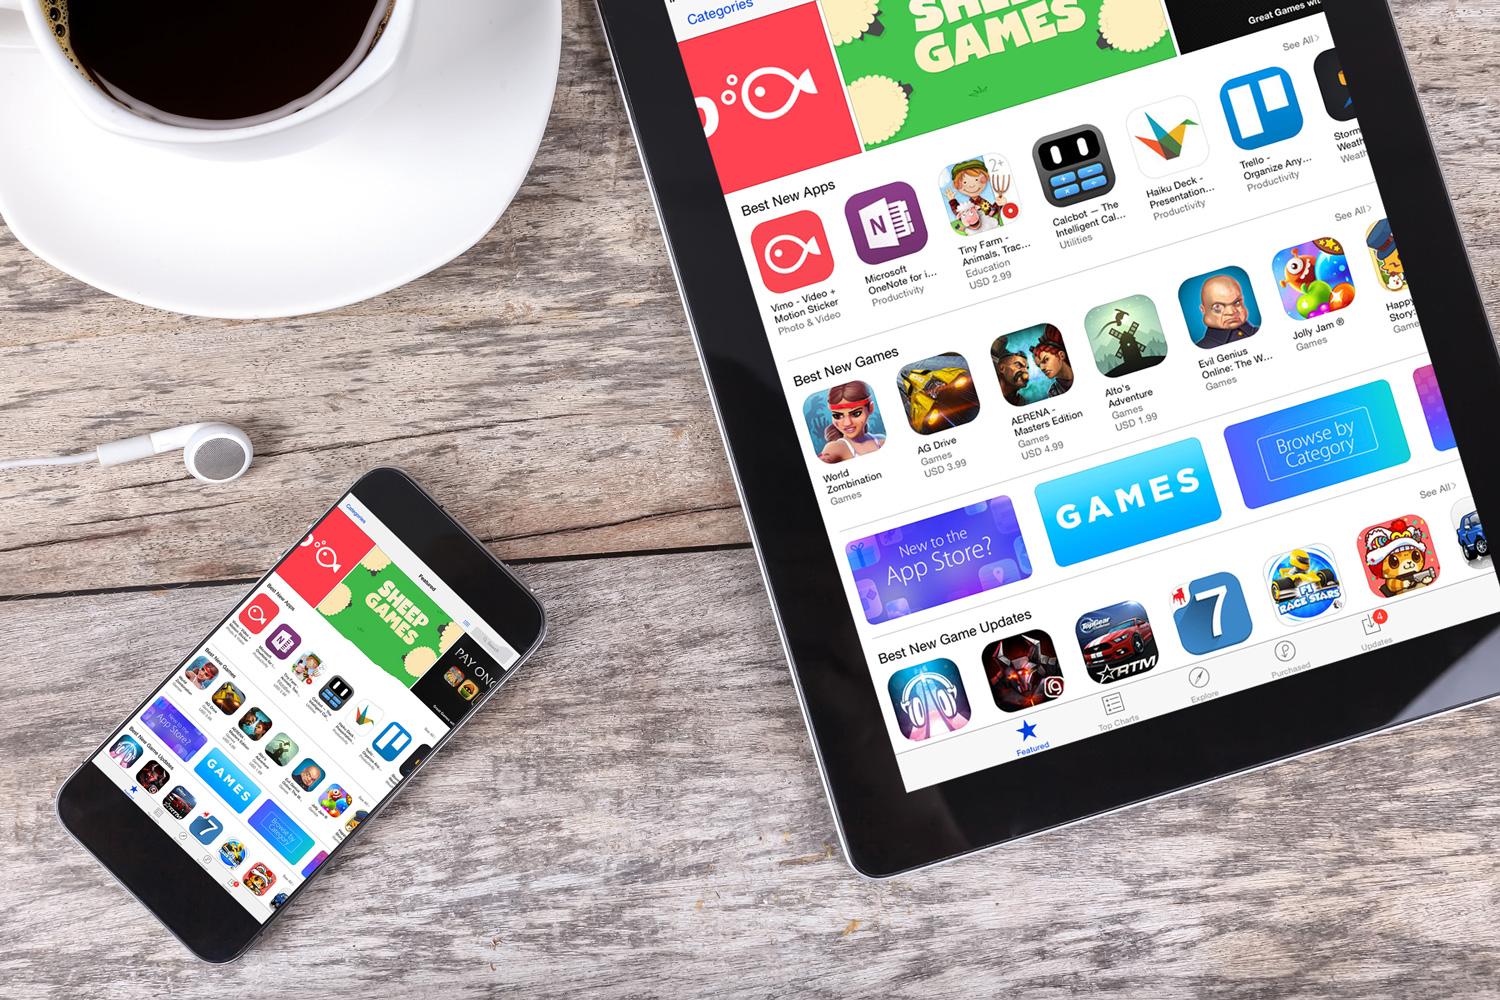 iOS 11's new App Store boosts downloads by 800% for featured apps